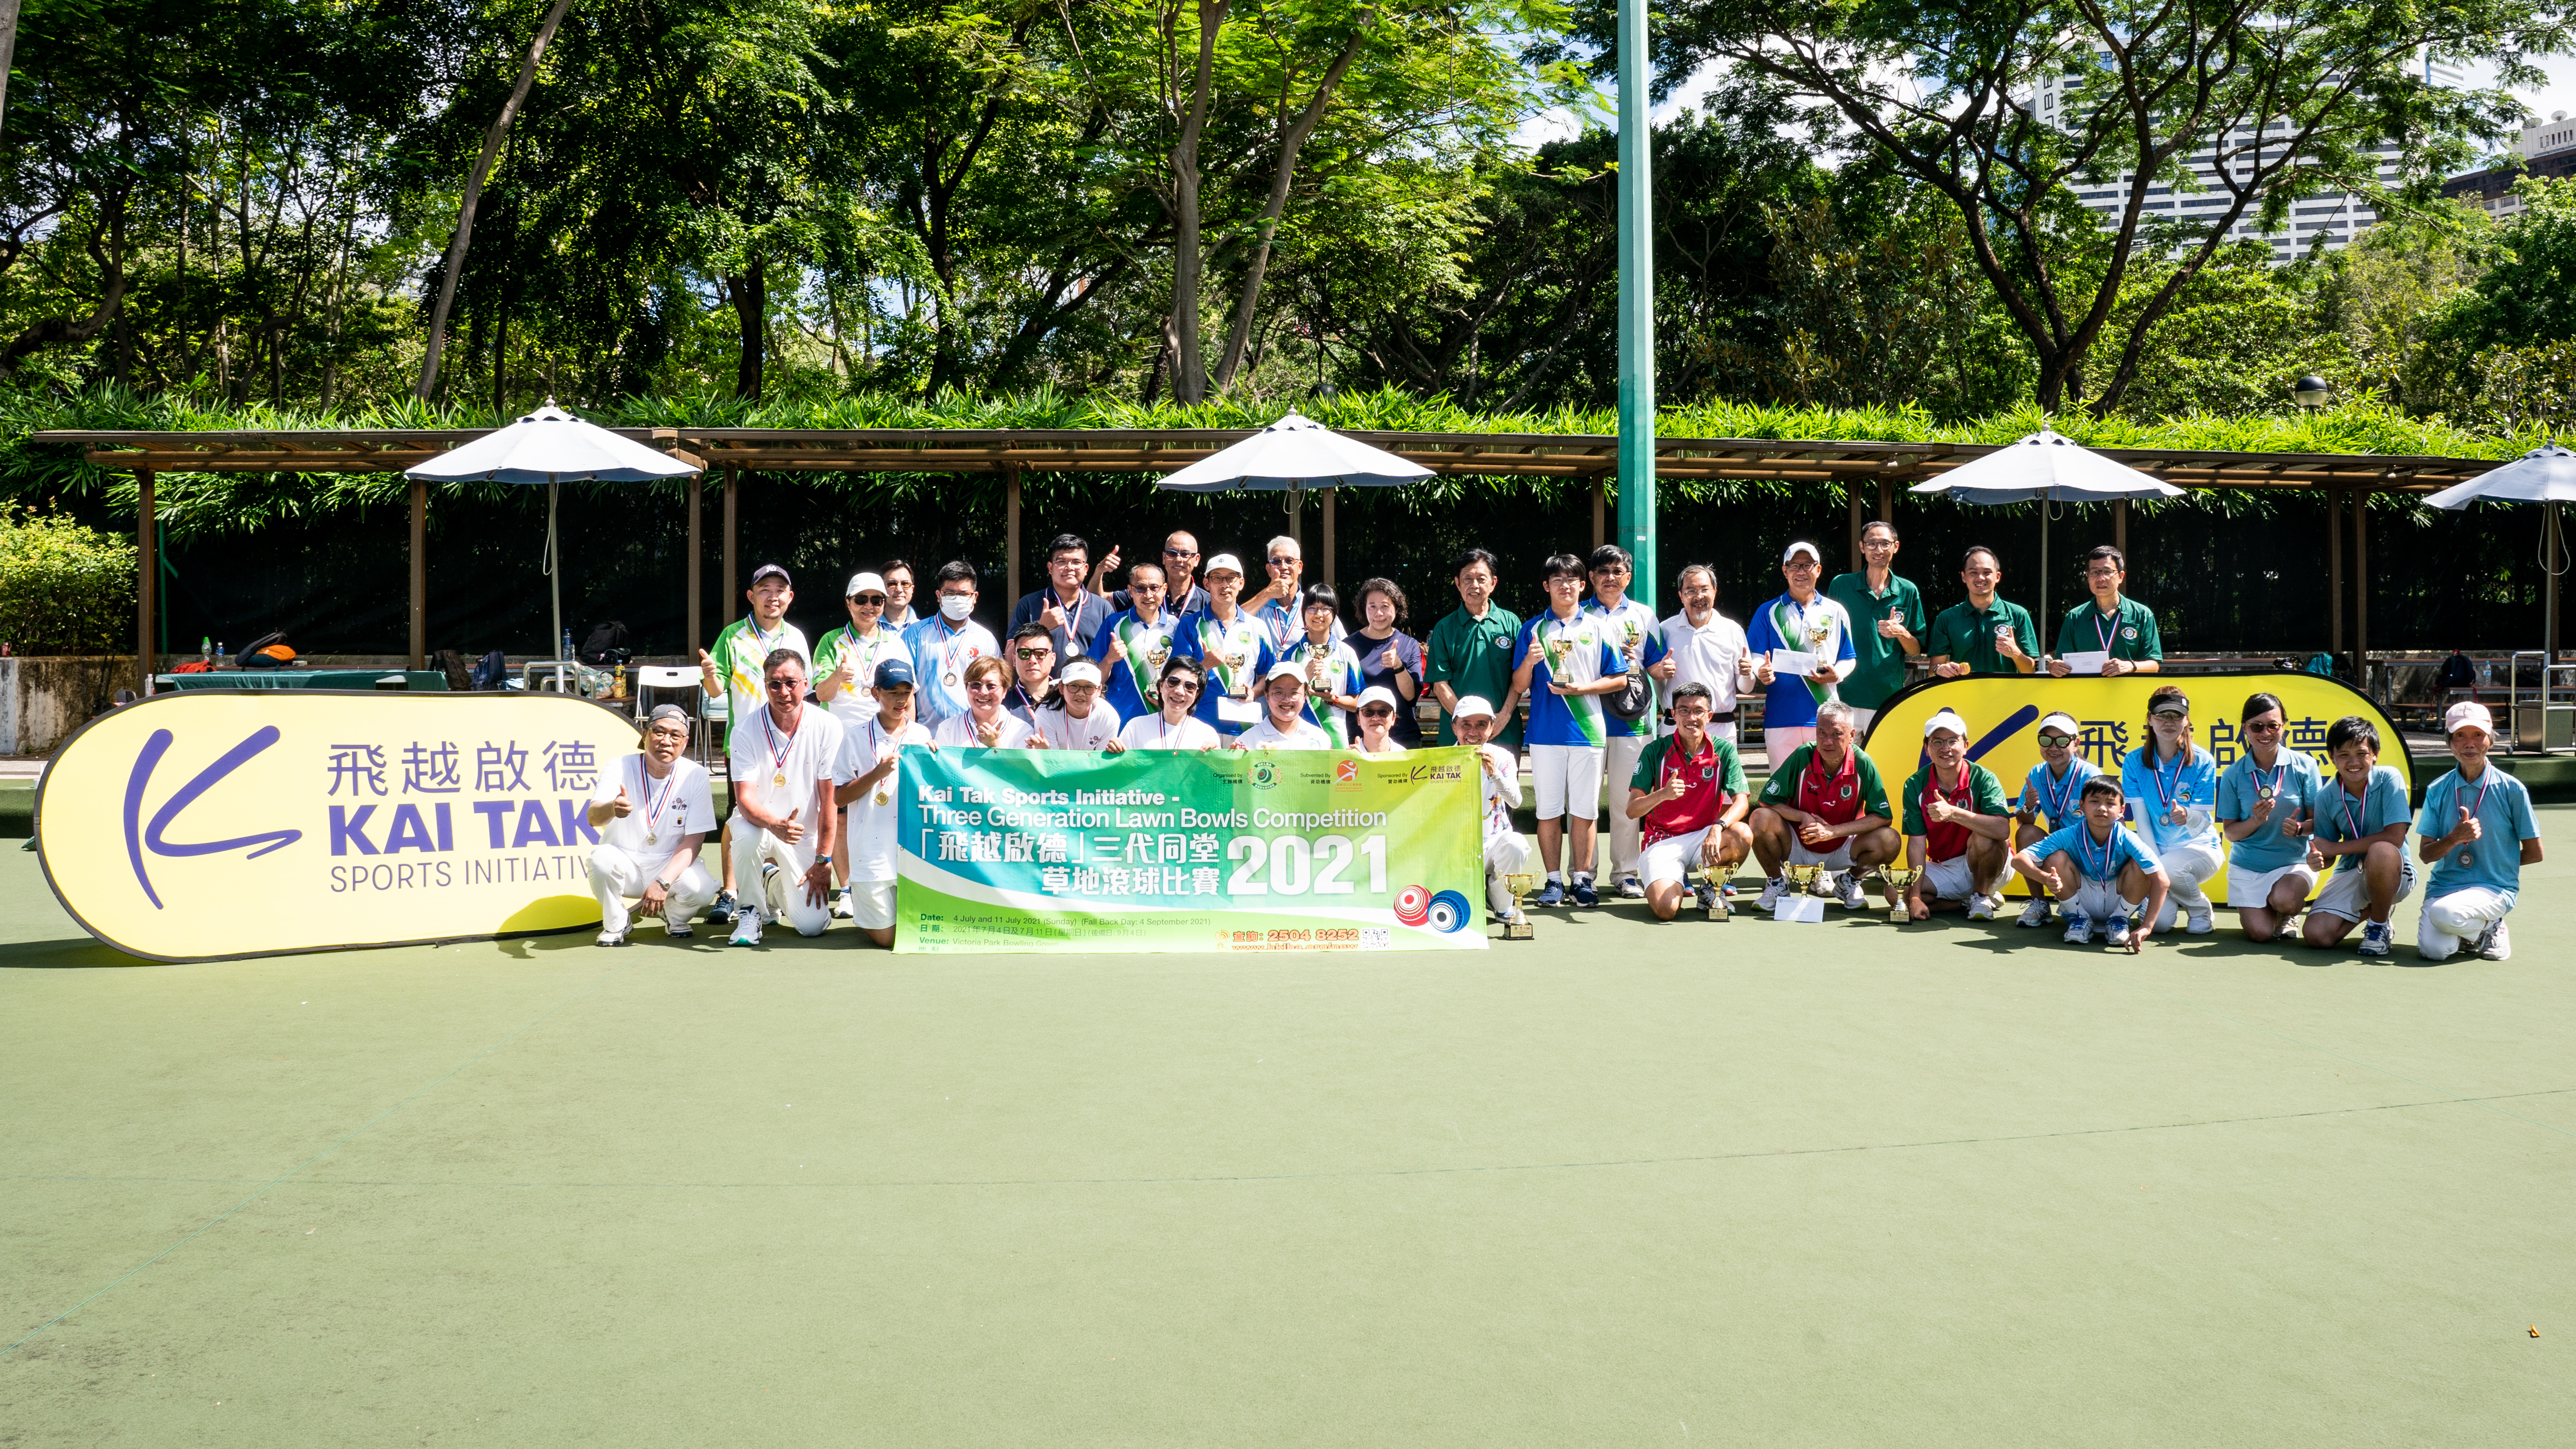 [Result update] KTSI Three Generations Lawn Bowls Competition 2021 (Photo & Result)